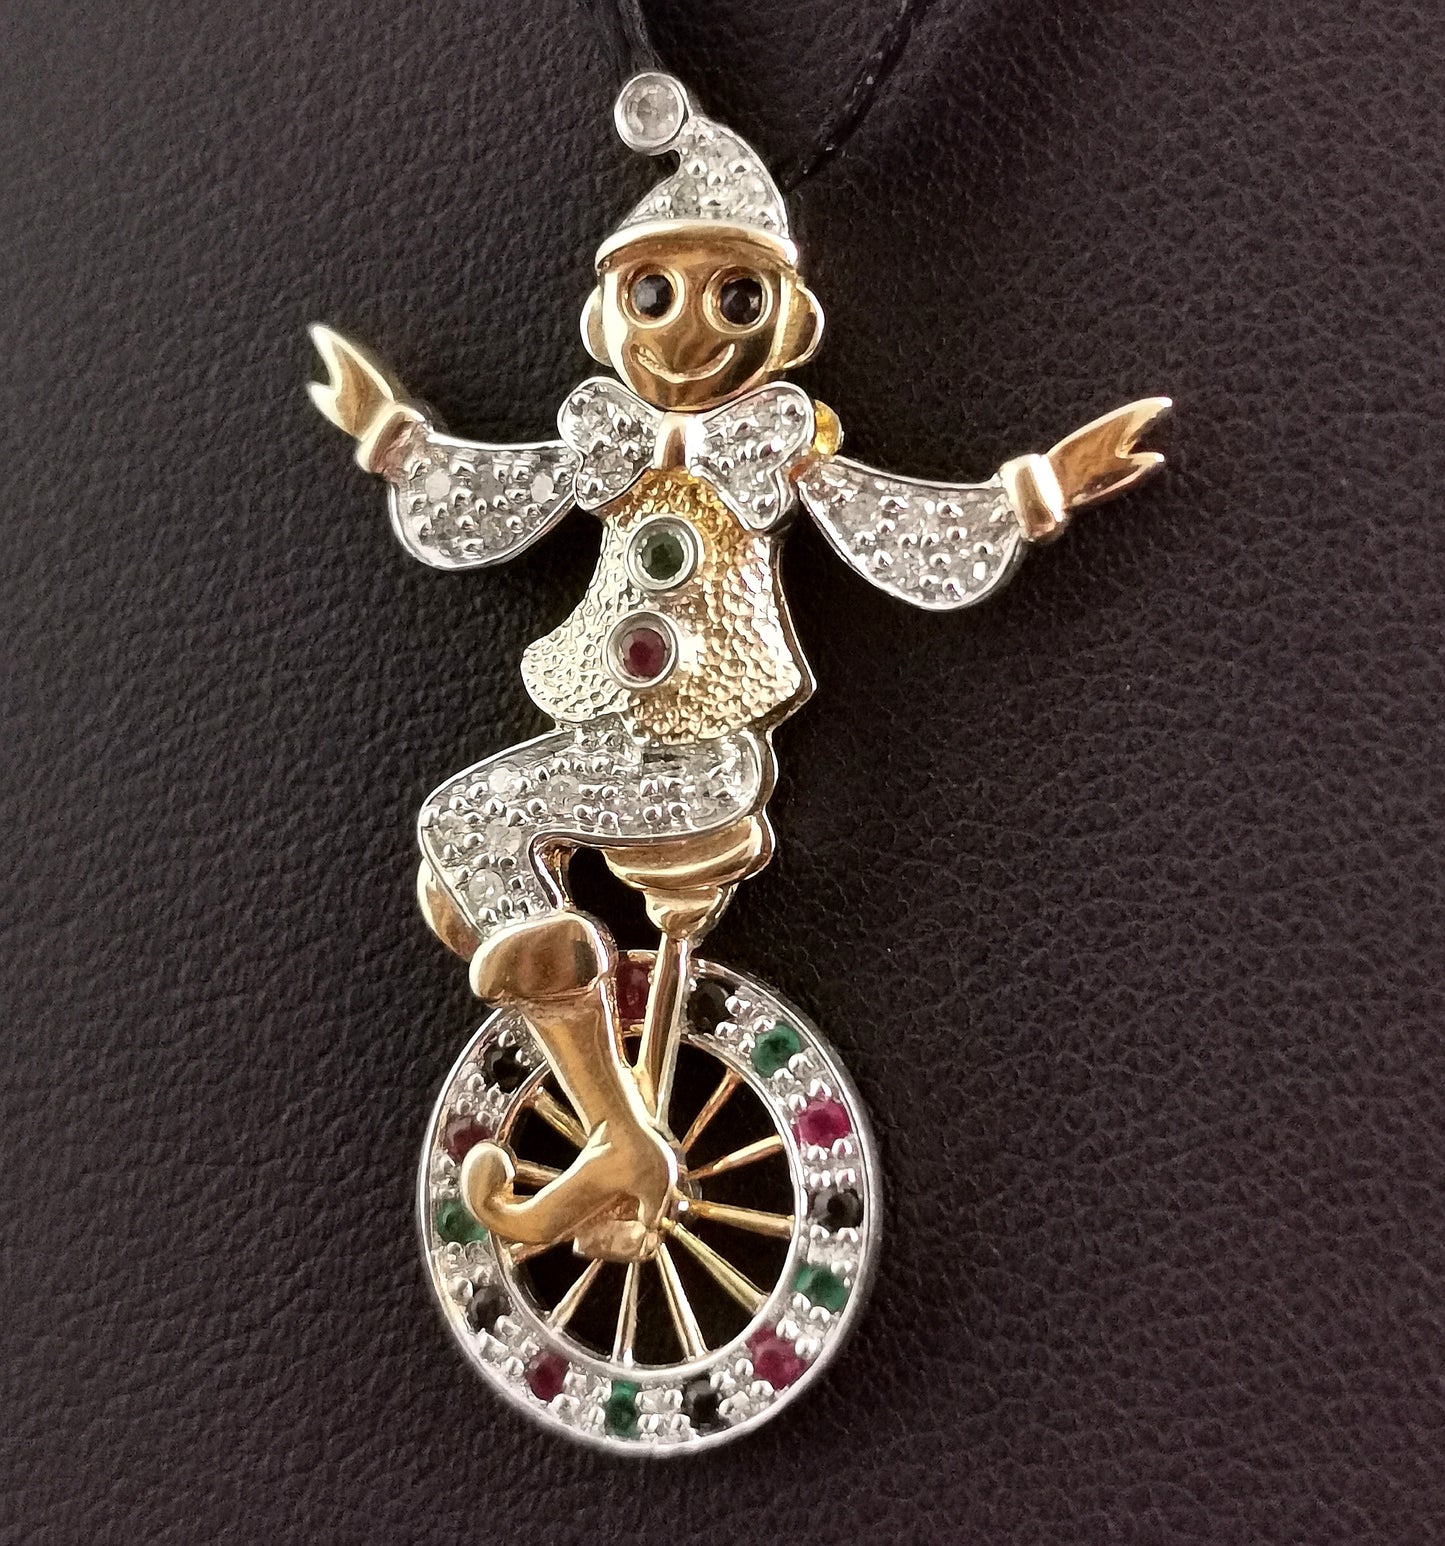 Vintage Gemstone Clown and Unicycle pendant, 9ct gold, Diamond, Emerald, Ruby and Sapphire